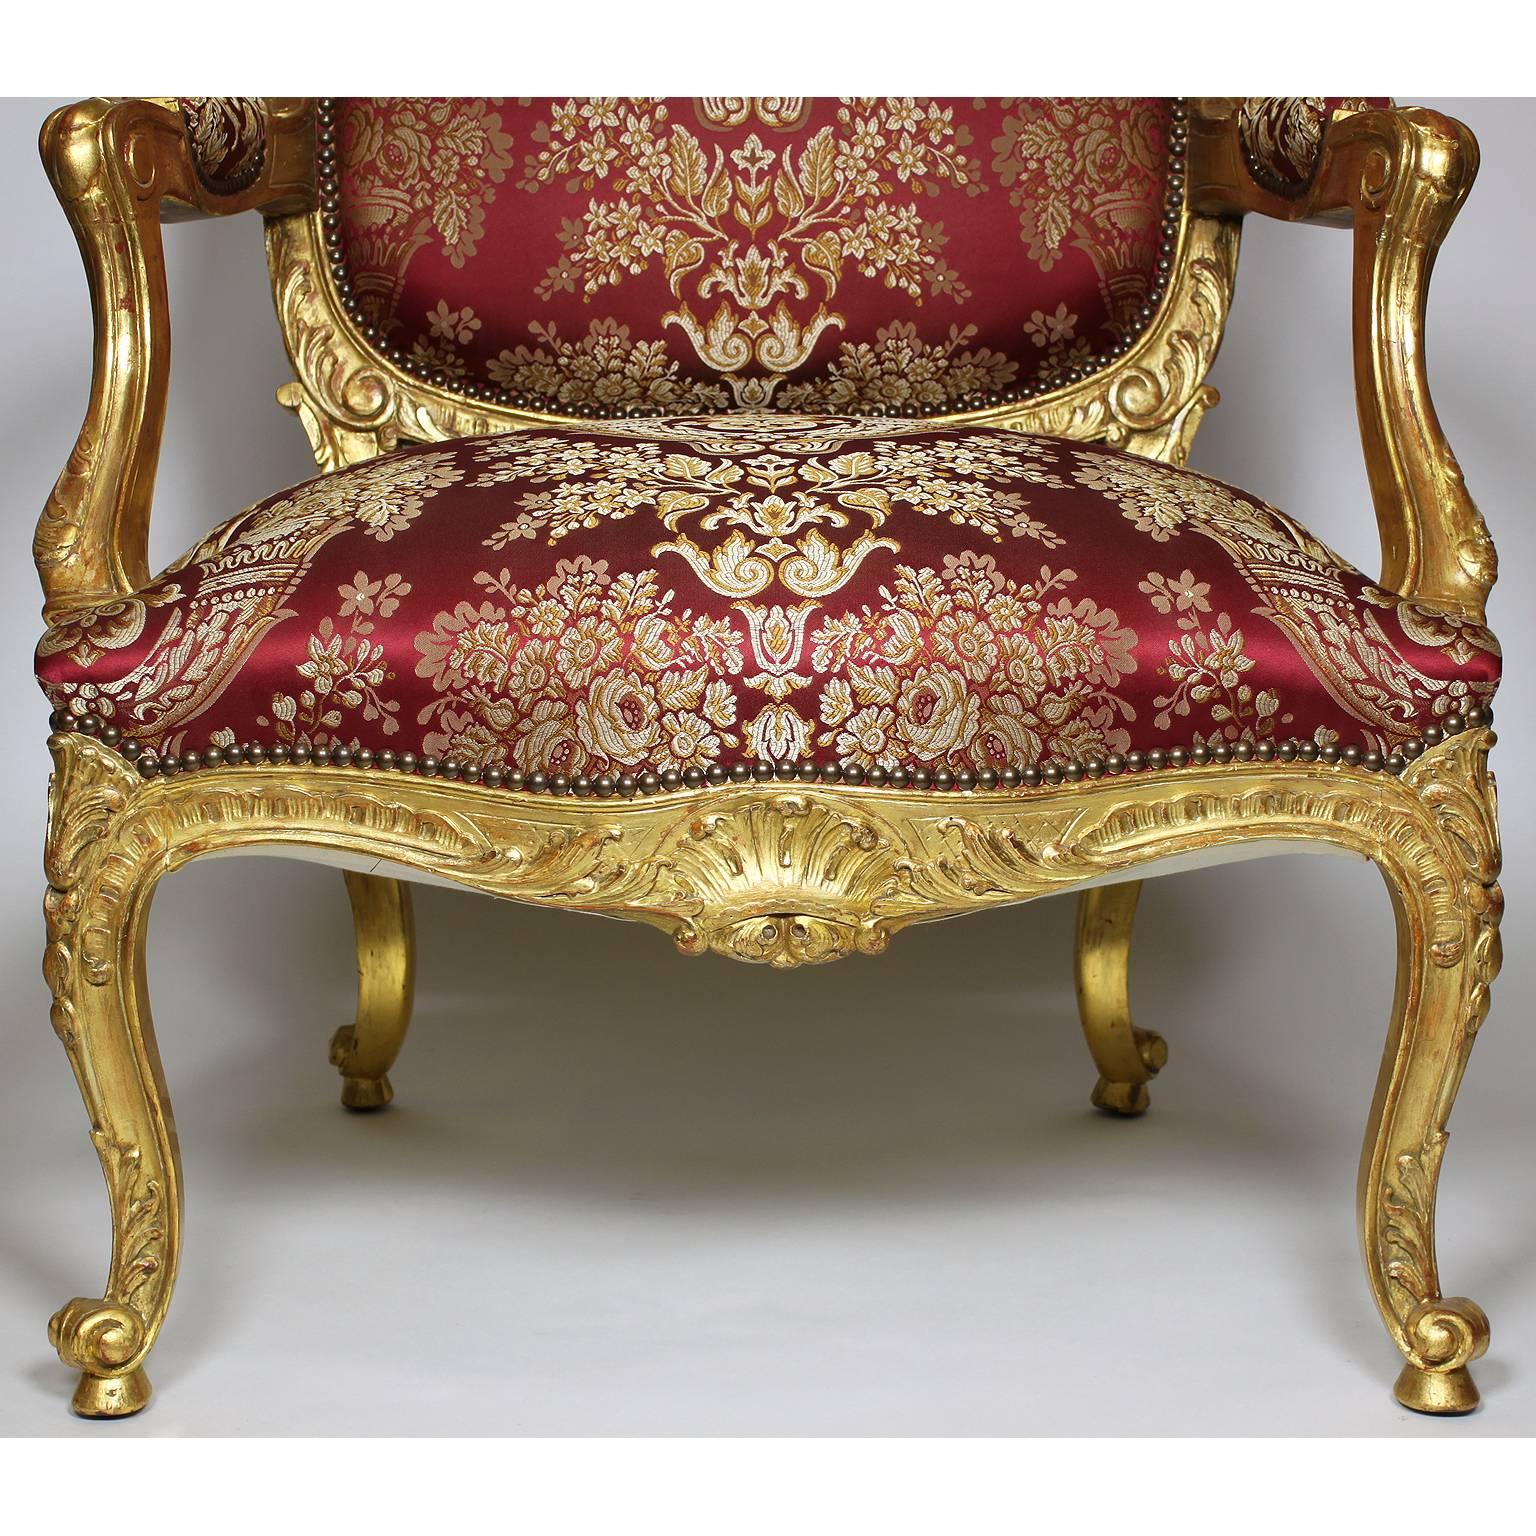 Palatial 19th Century Louis XV Style Giltwood Carved Five-Piece Salon Suite For Sale 3